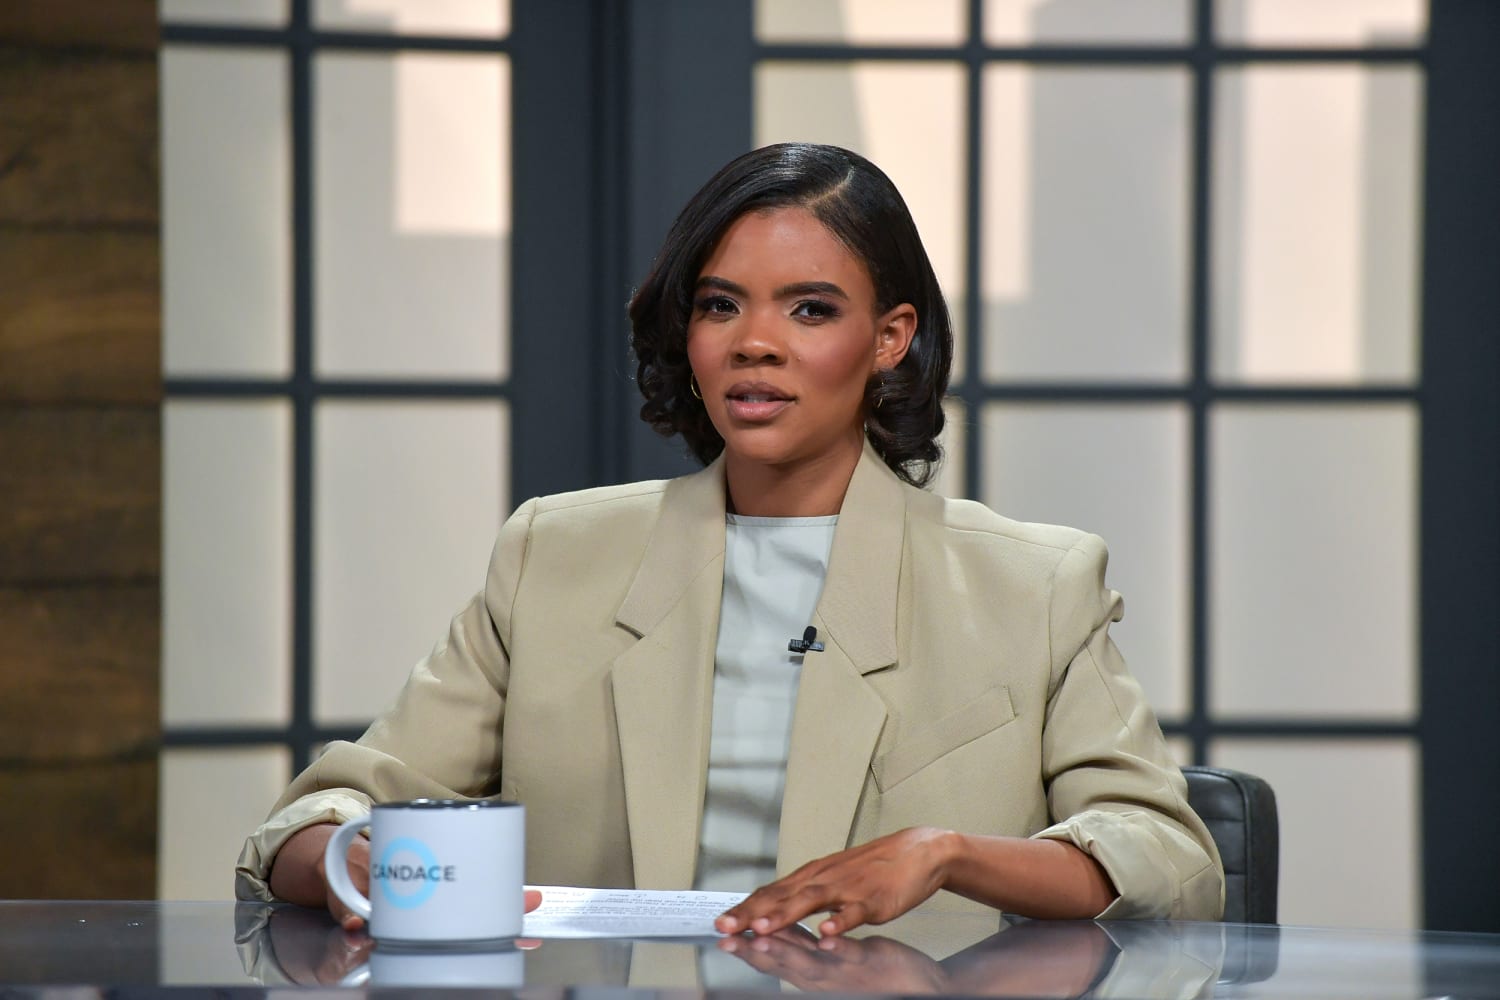 At risk of losing YouTube ad revenue, Candace Owens continues to host anti-LGBTQ rhetoric (mediamatters.org)